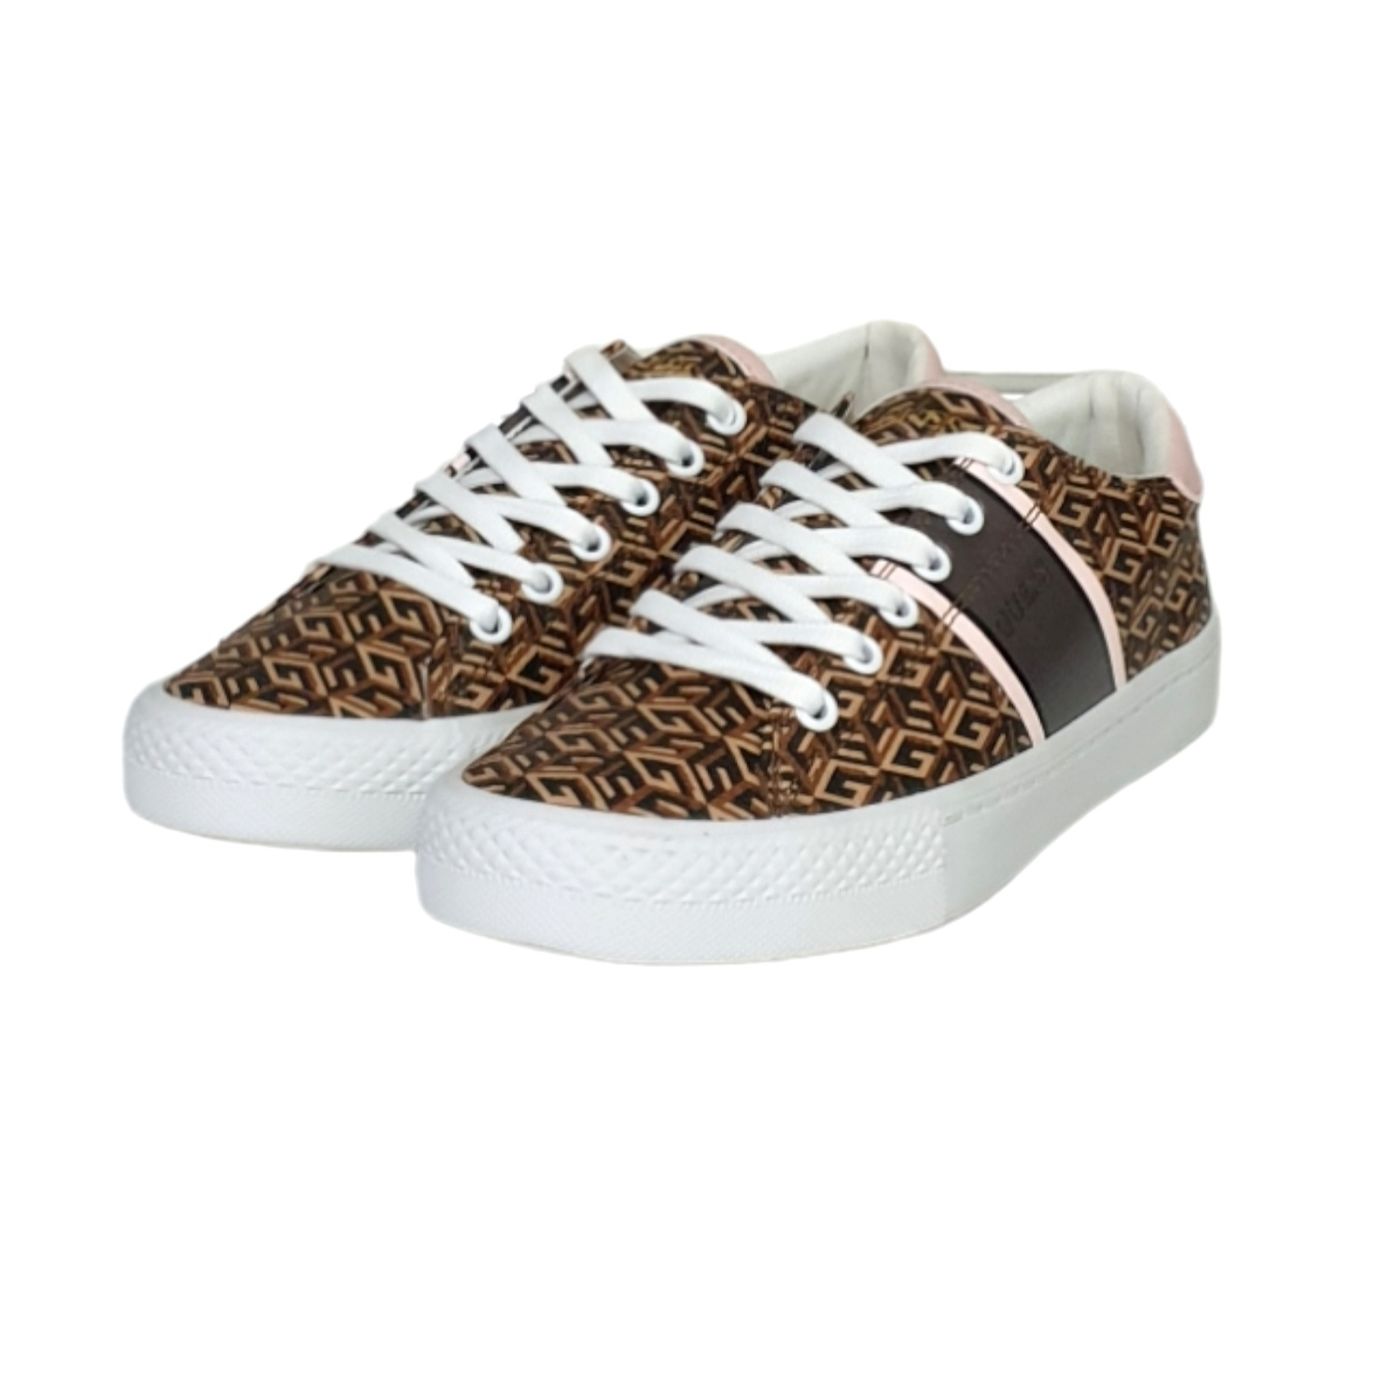 SNEAKERS GUESS DONNA CON LOGO STAMPATO Guess walkingon